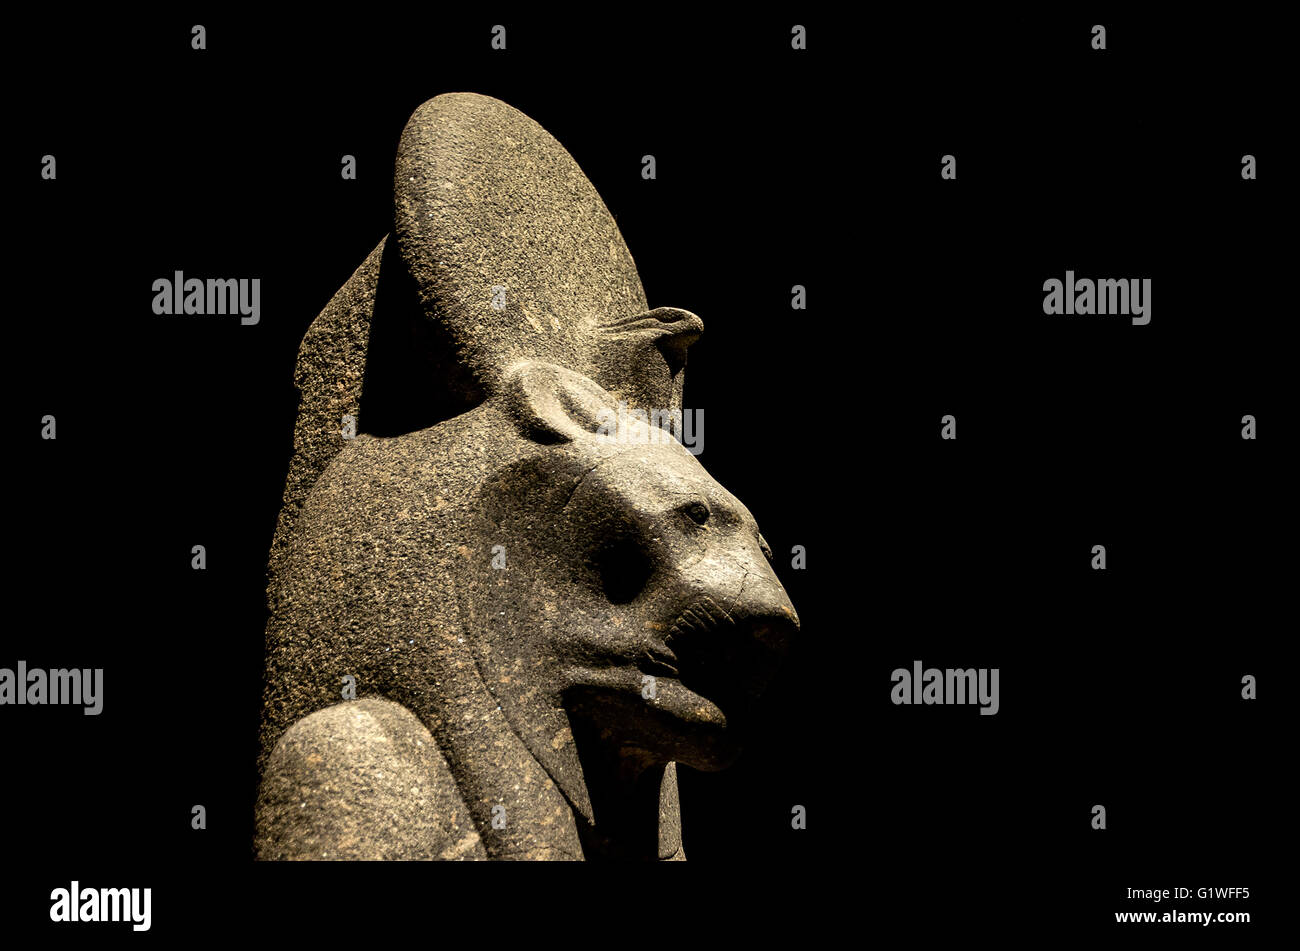 Turin, Italy, March 8 2013: egyptian divinity statue on display at the Turin's Egypt Museum Stock Photo